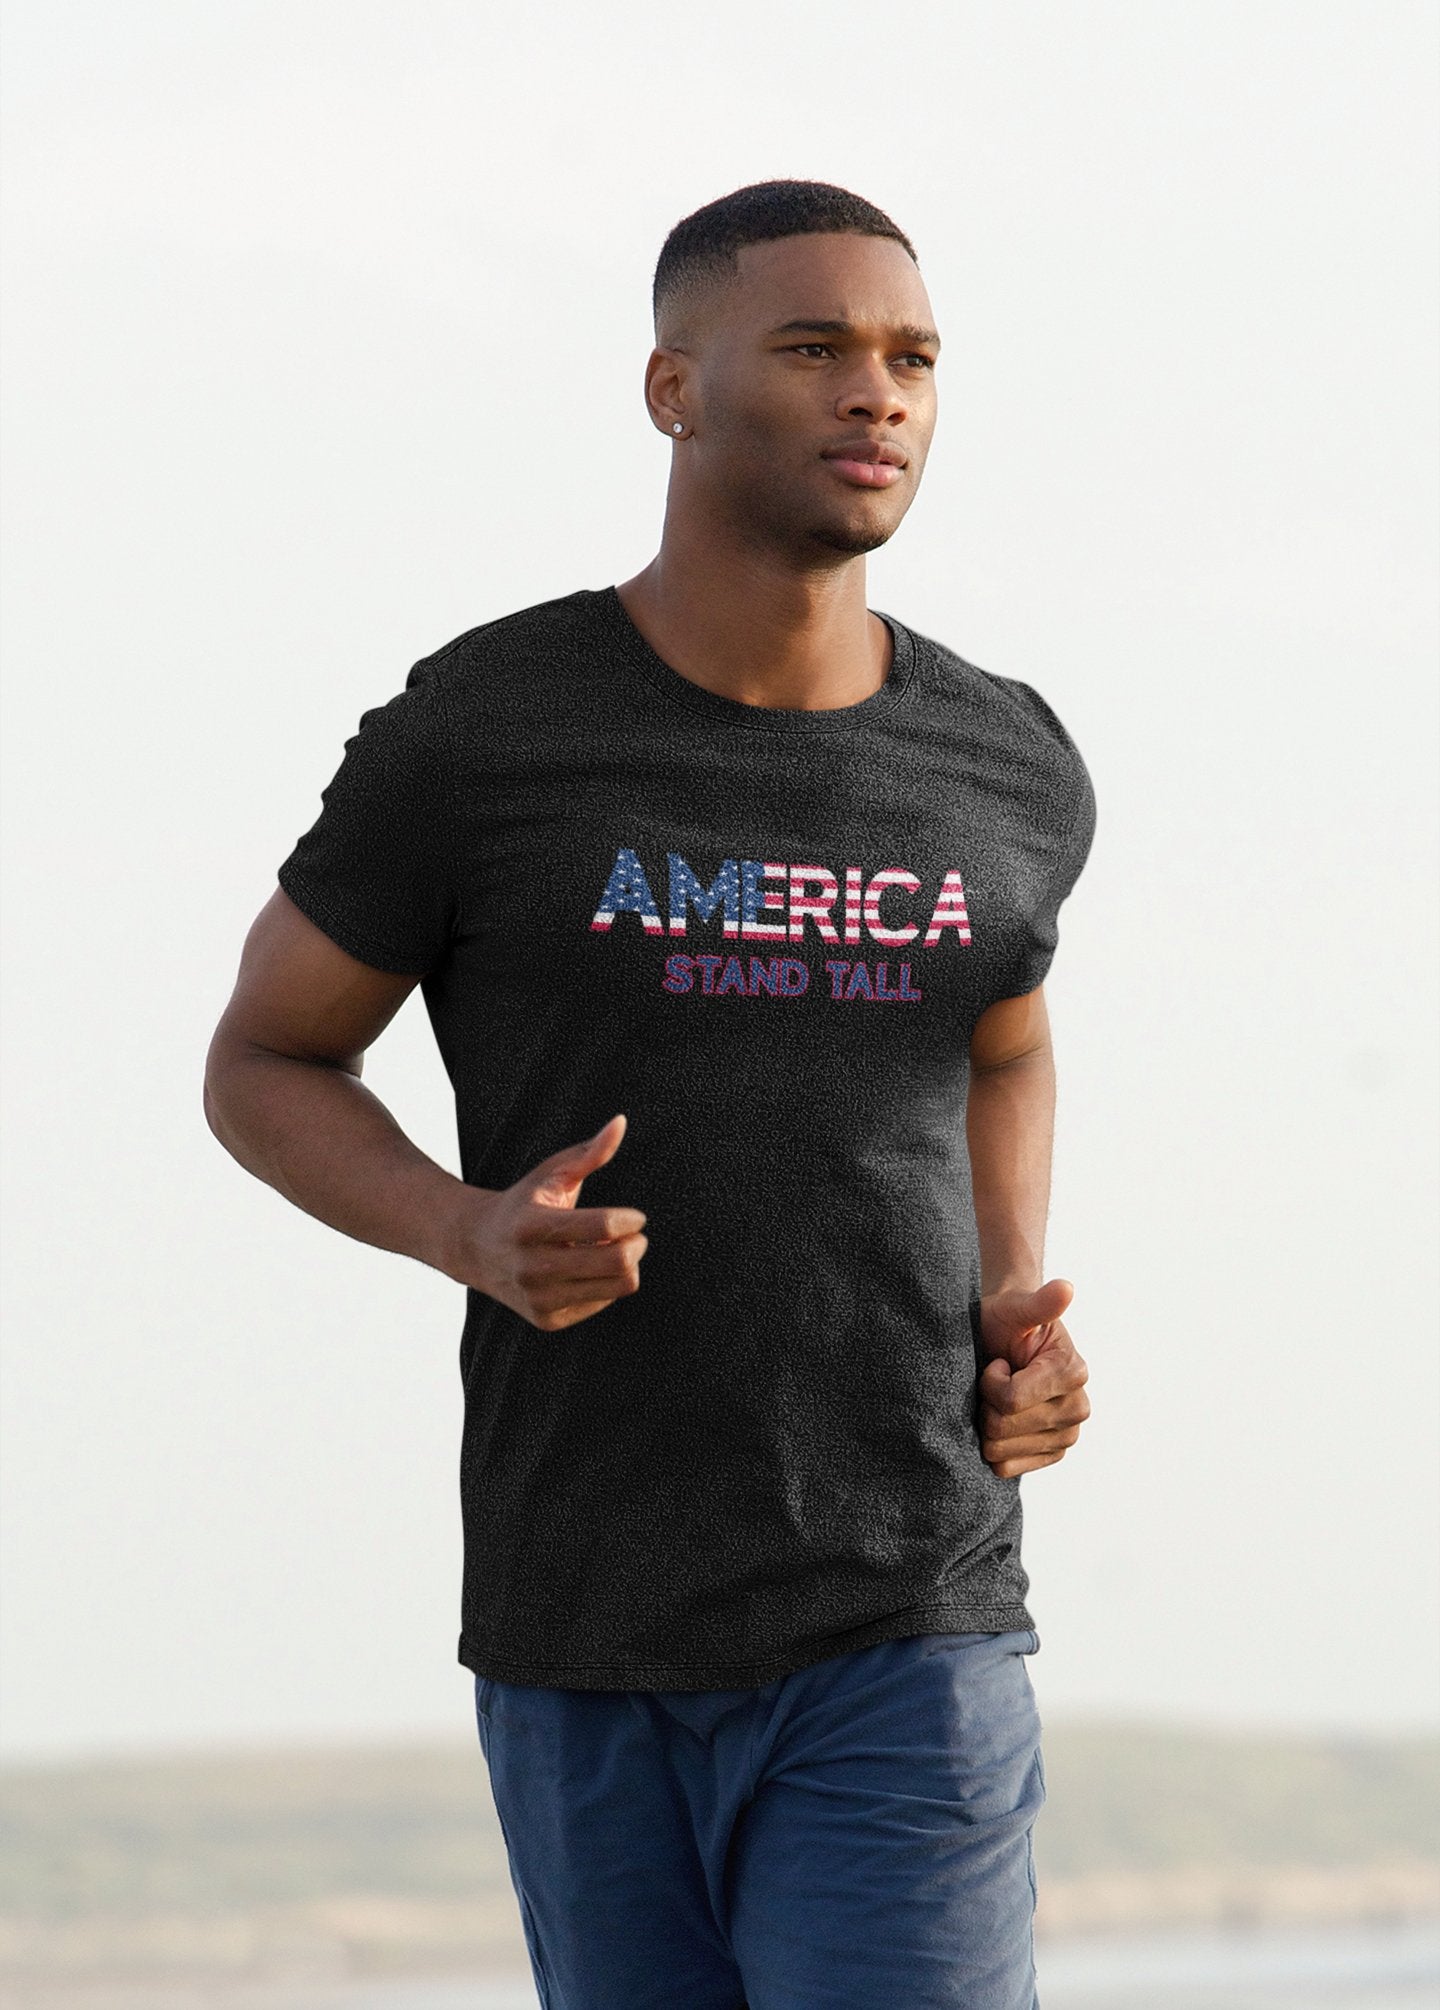 America Stand Tall Unisex T-Shirt - Encore2woBlack HeatherS